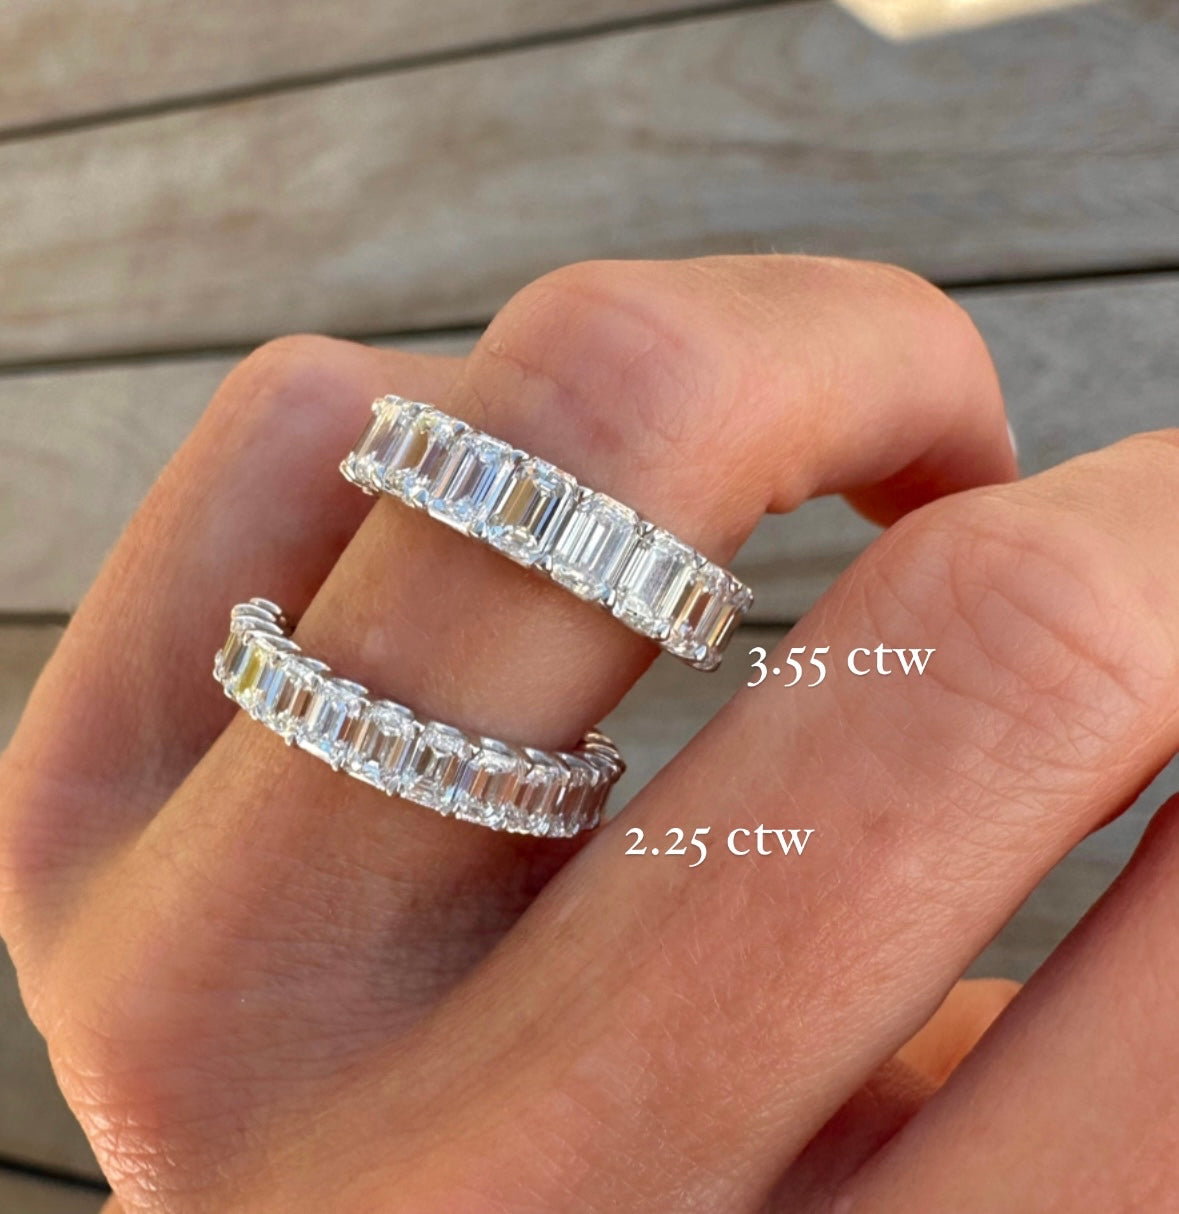 3 Stone Emerald Cut Engagement Rings - a Combo to Notice - Ava Diamonds